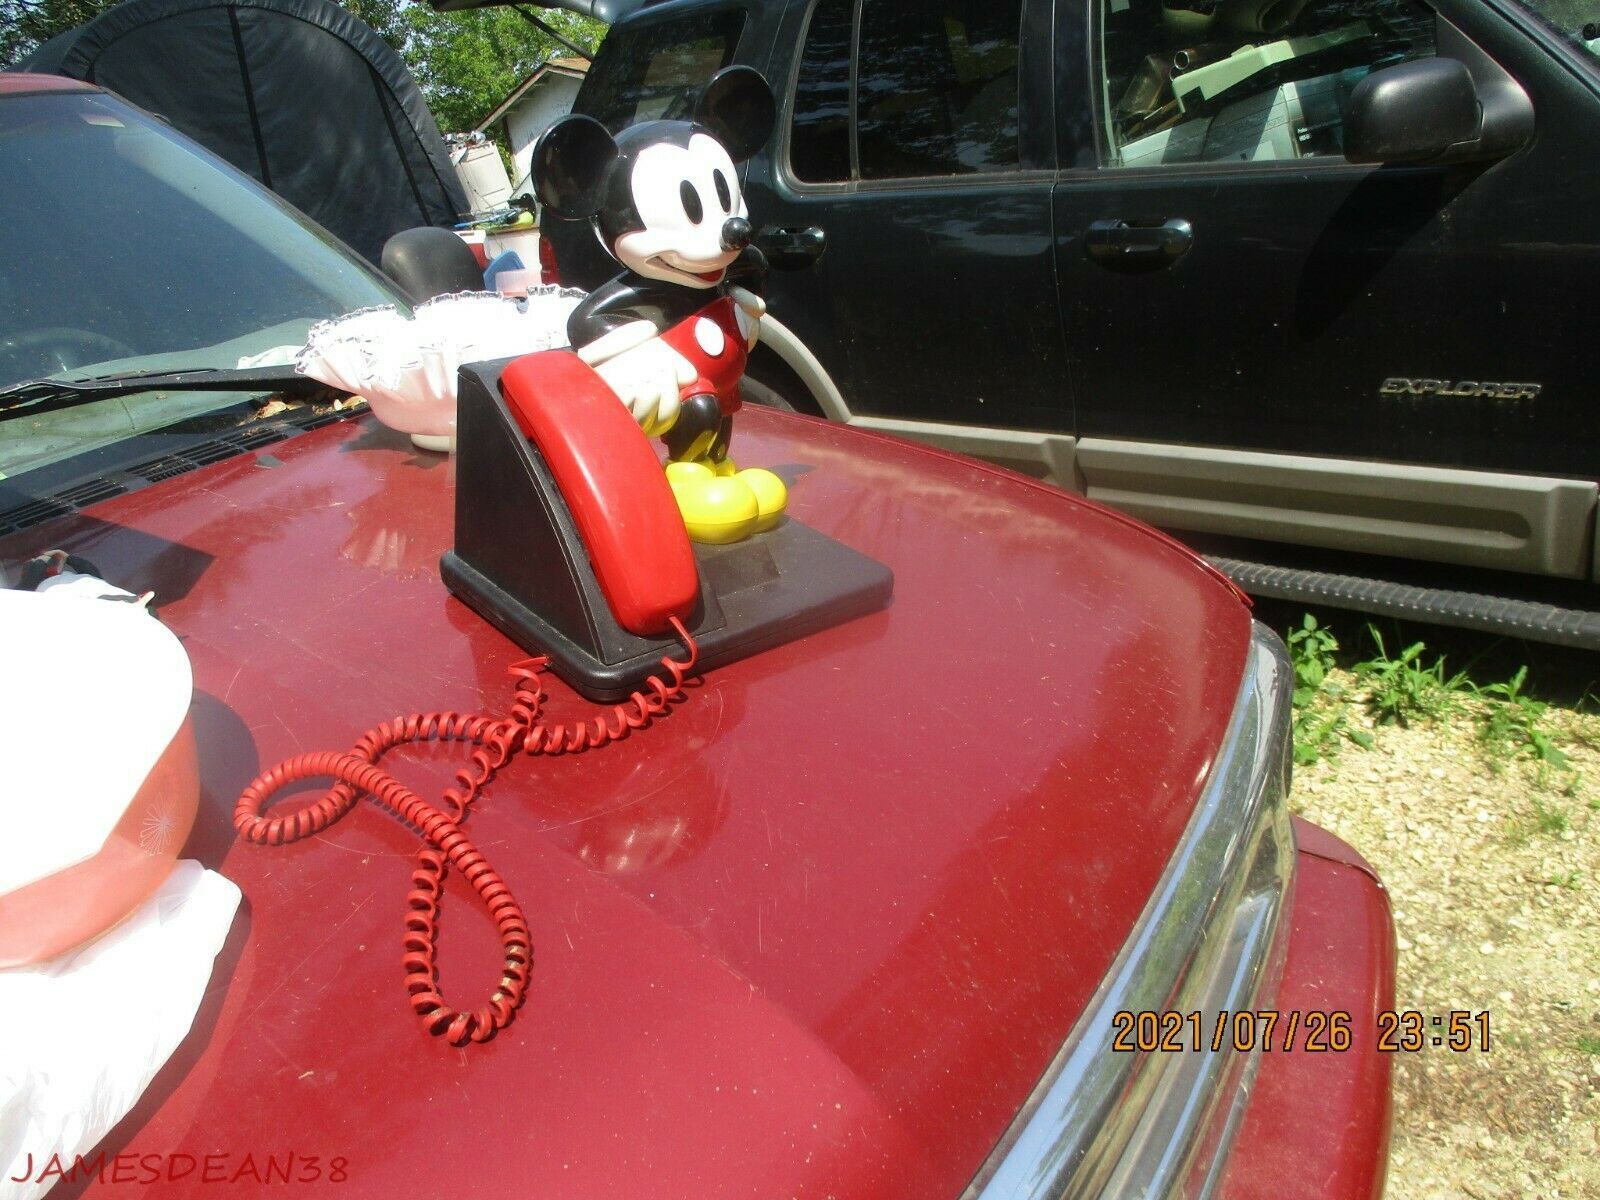 Vintage 1990's Mickey Mouse Corded Land Line Touch Tone Telephone At & T Design